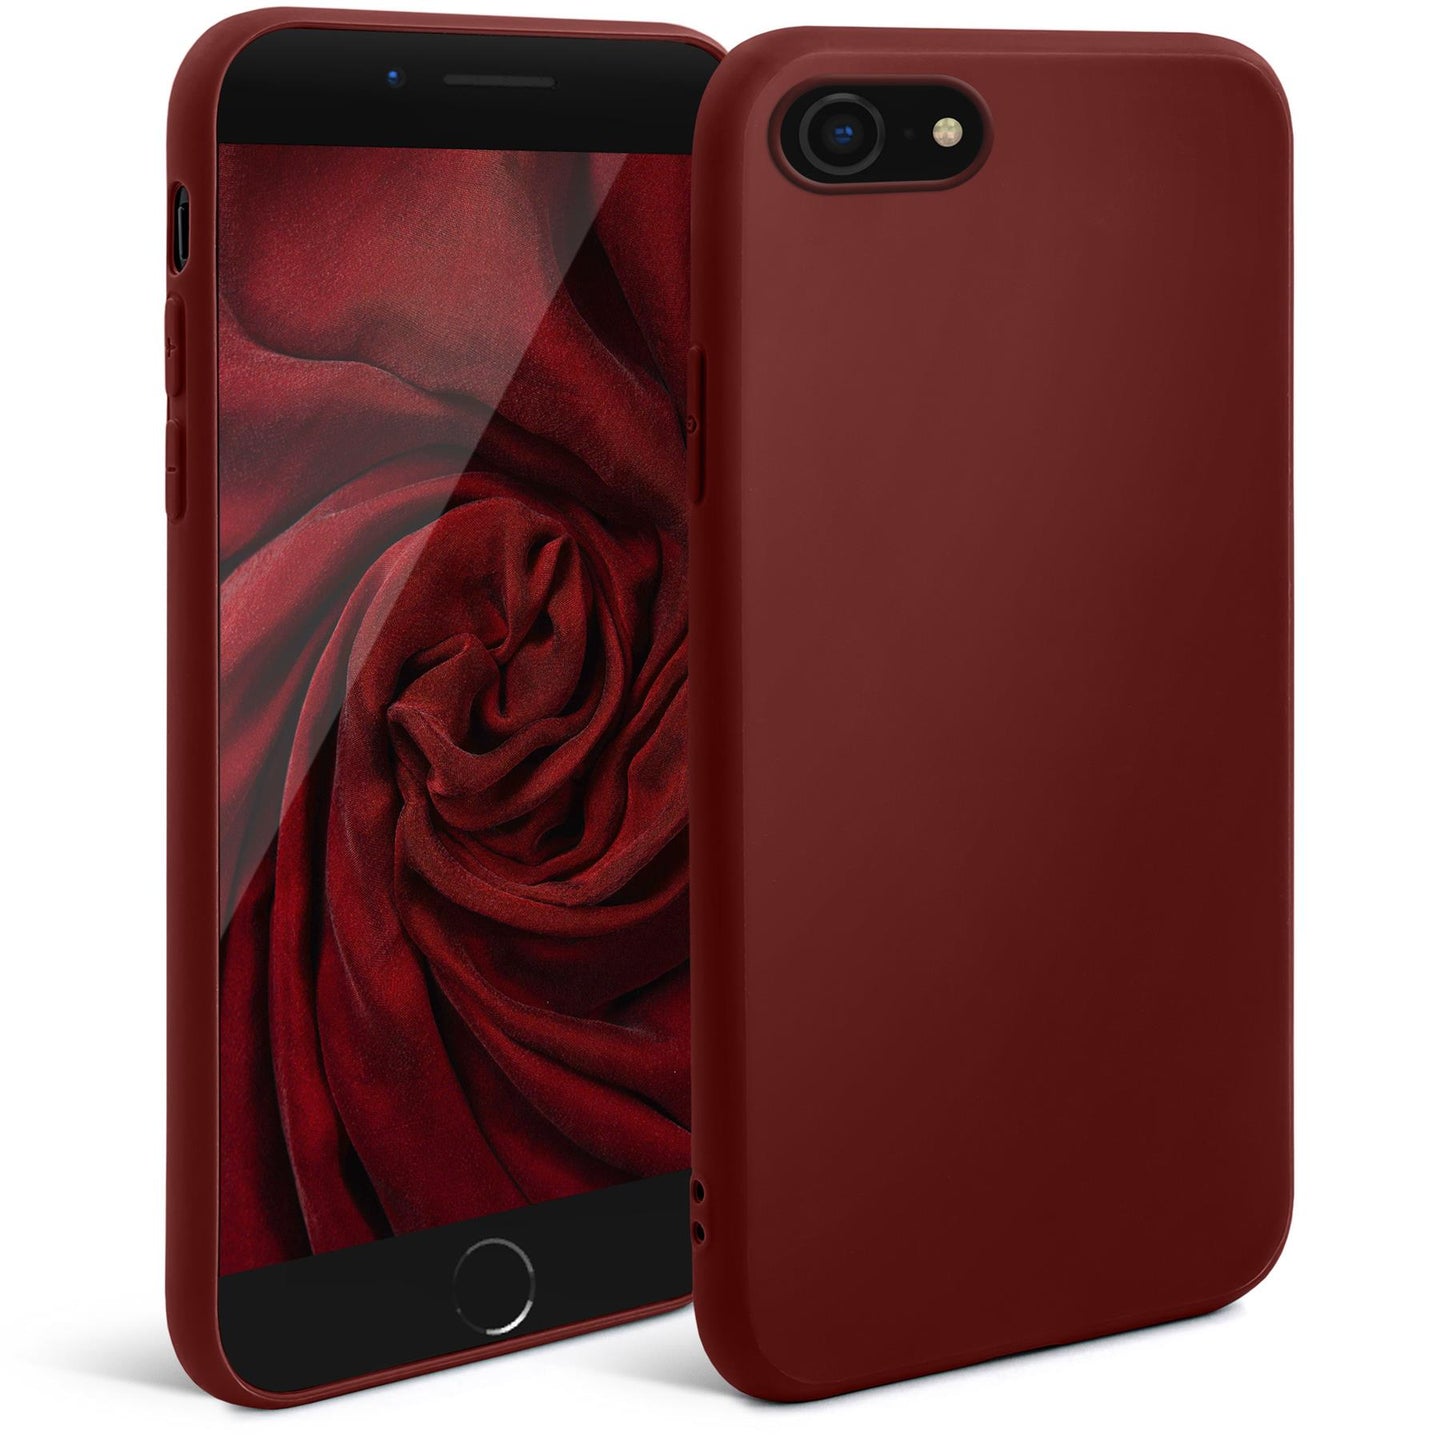 Moozy Minimalist Series Silicone Case for iPhone SE 2020, iPhone 8 and iPhone 7, Wine Red - Matte Finish Slim Soft TPU Cover